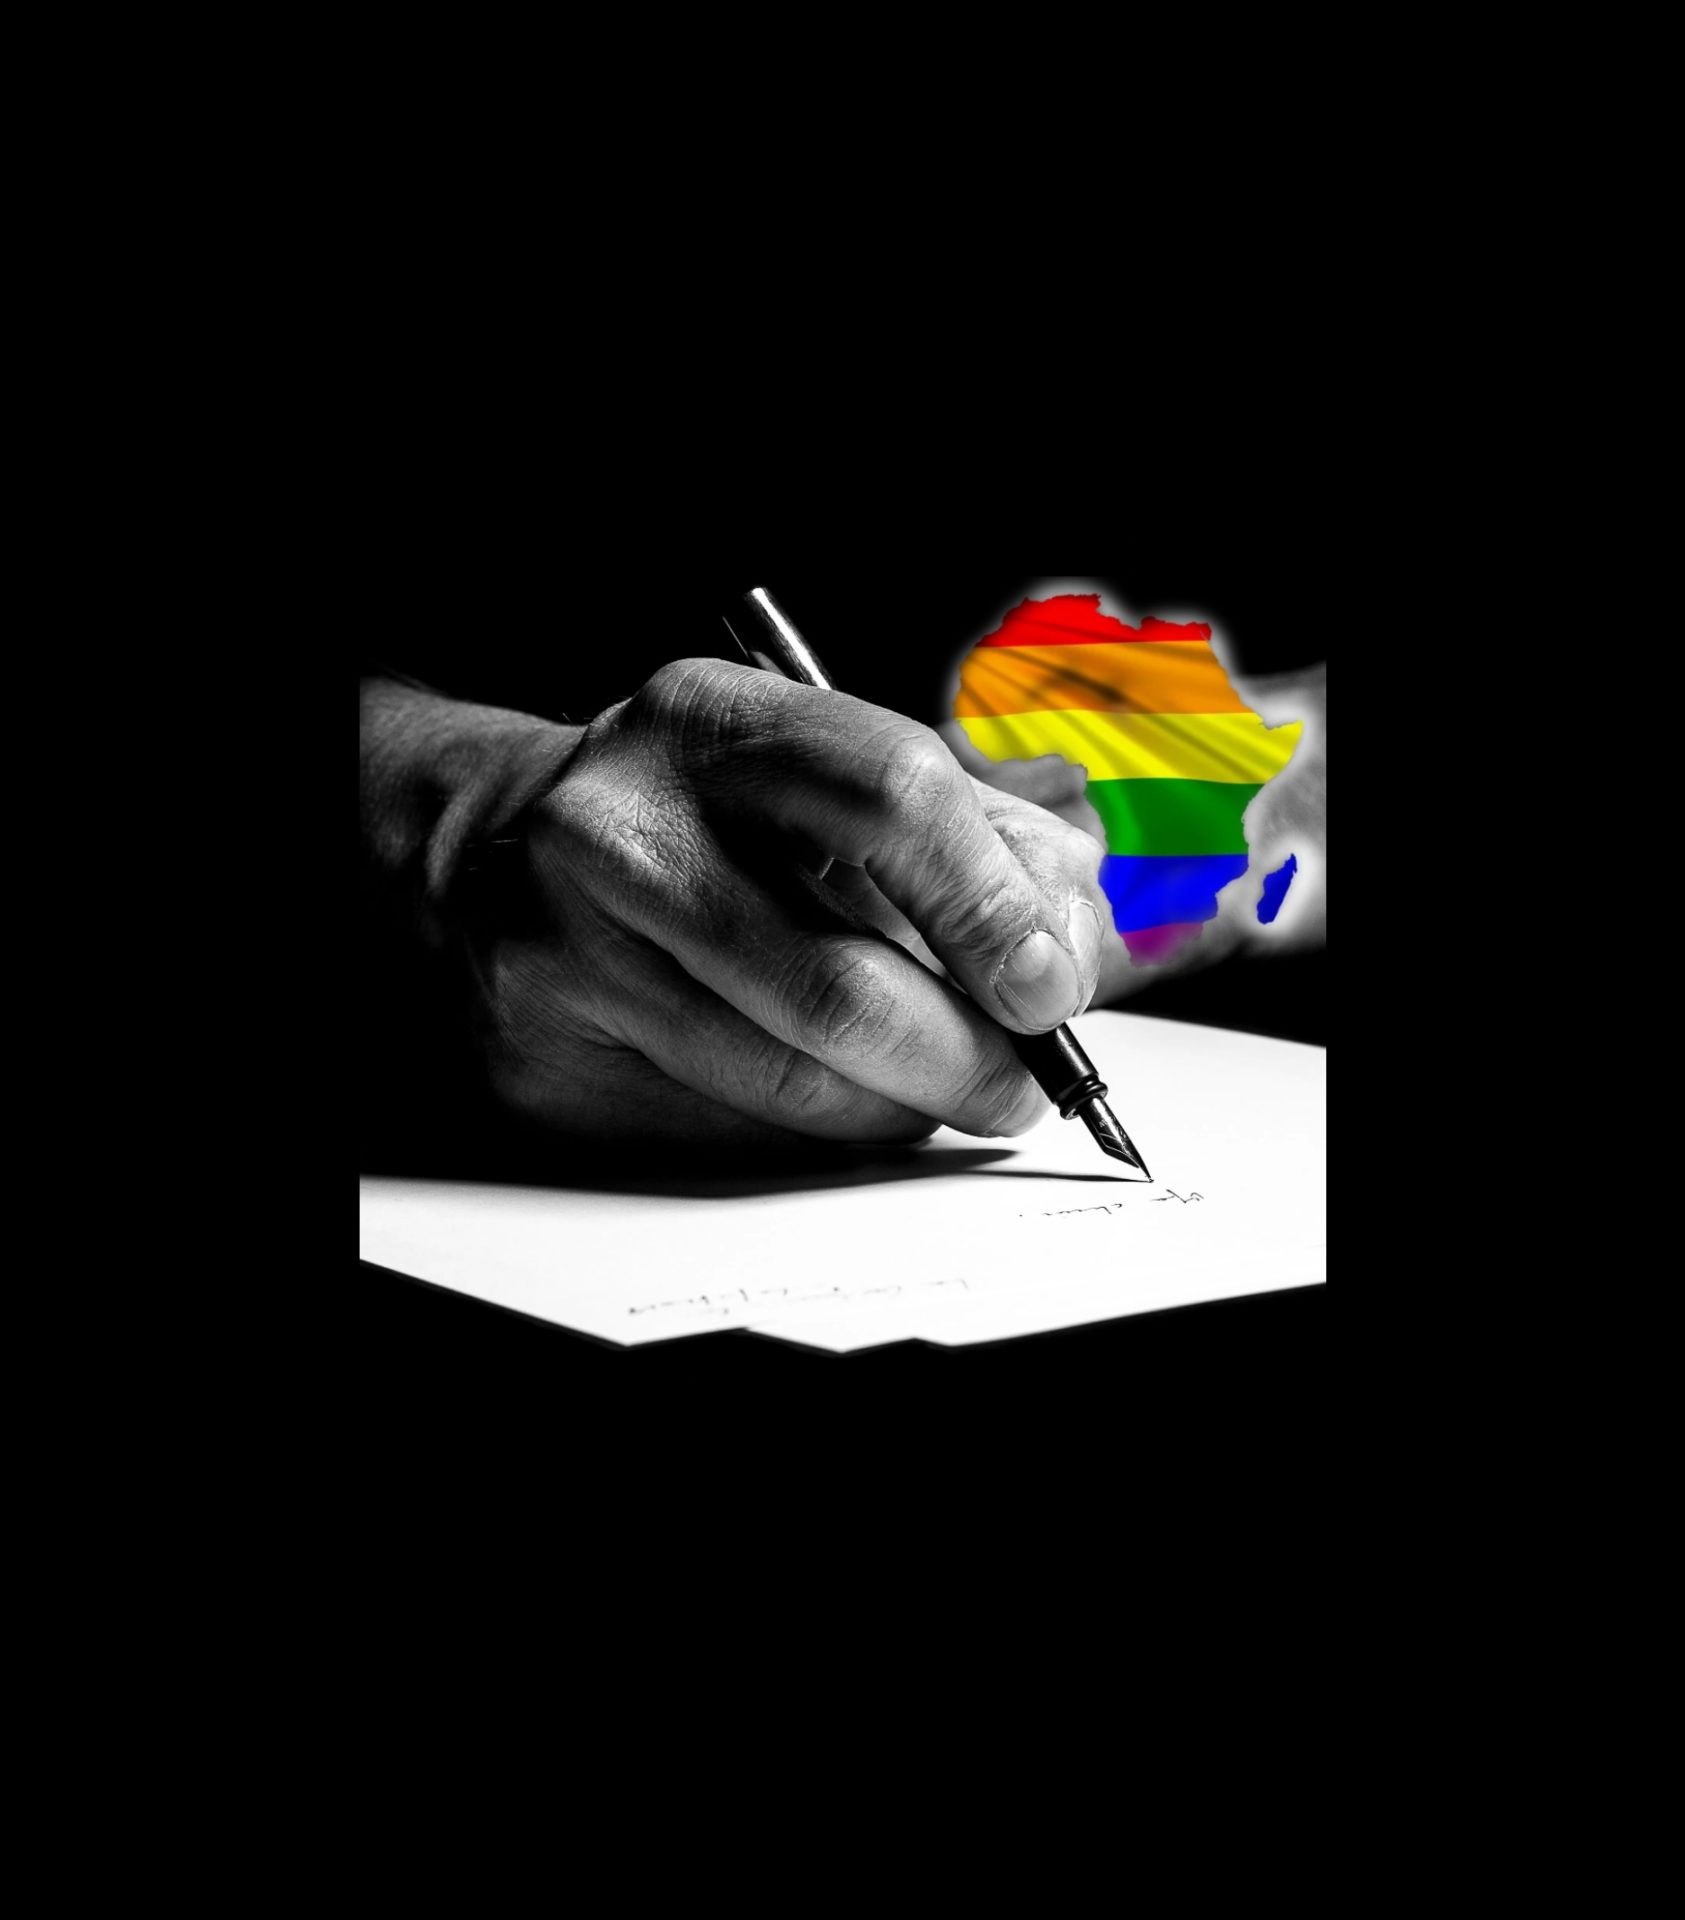 Research seminar: "The emergence of LGBTQ-themed writing in Africa"